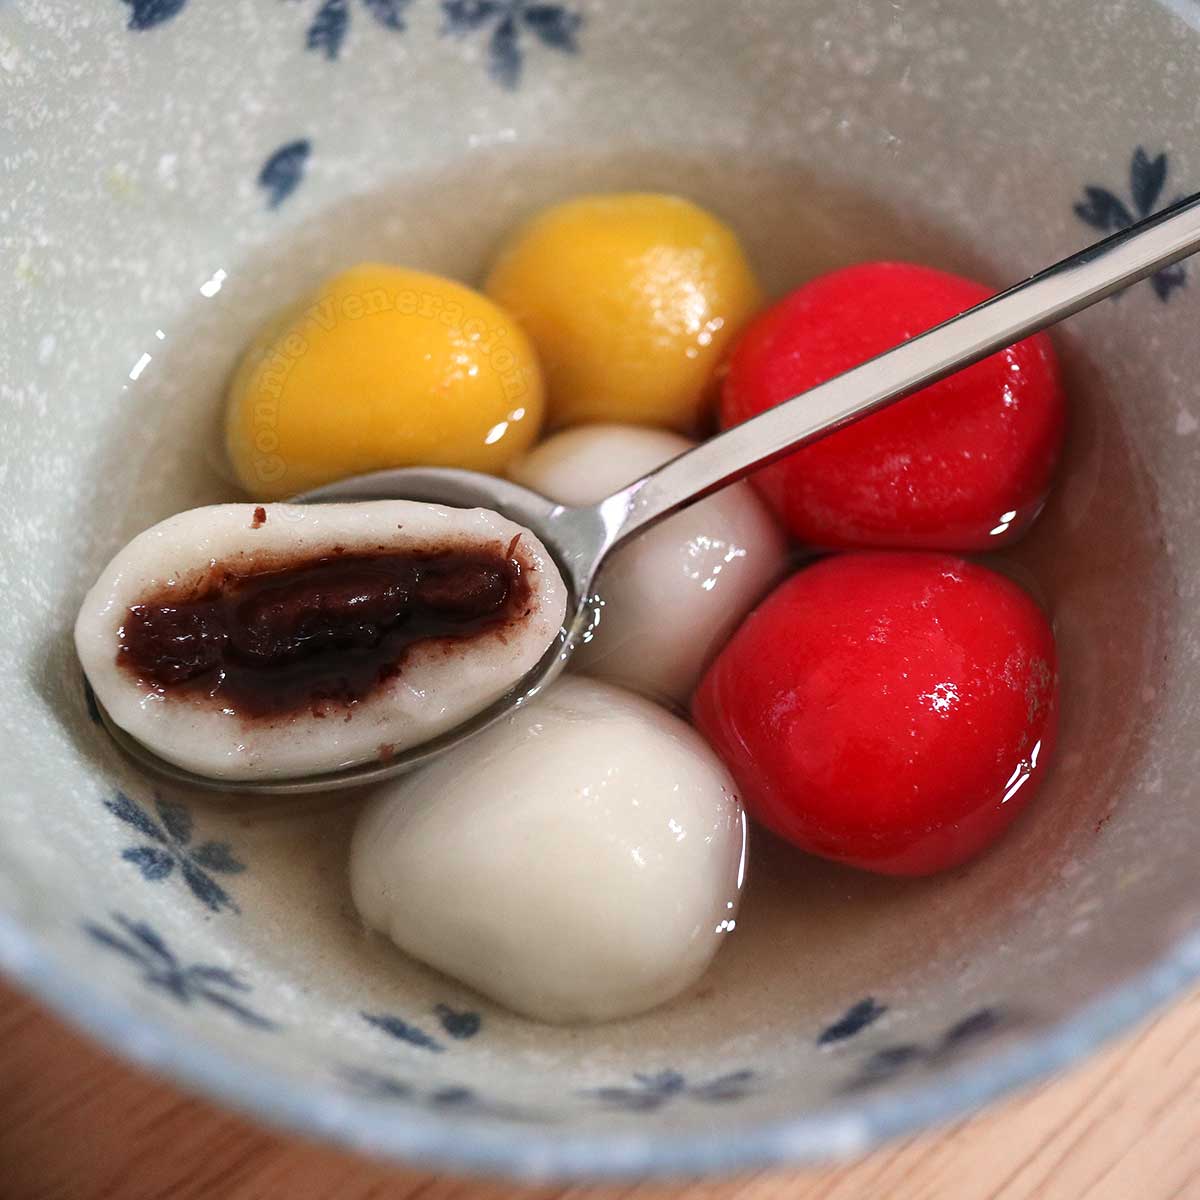 Sweet dish with mung beans: Sticky rice balls with red bean paste filling (tangyuan)